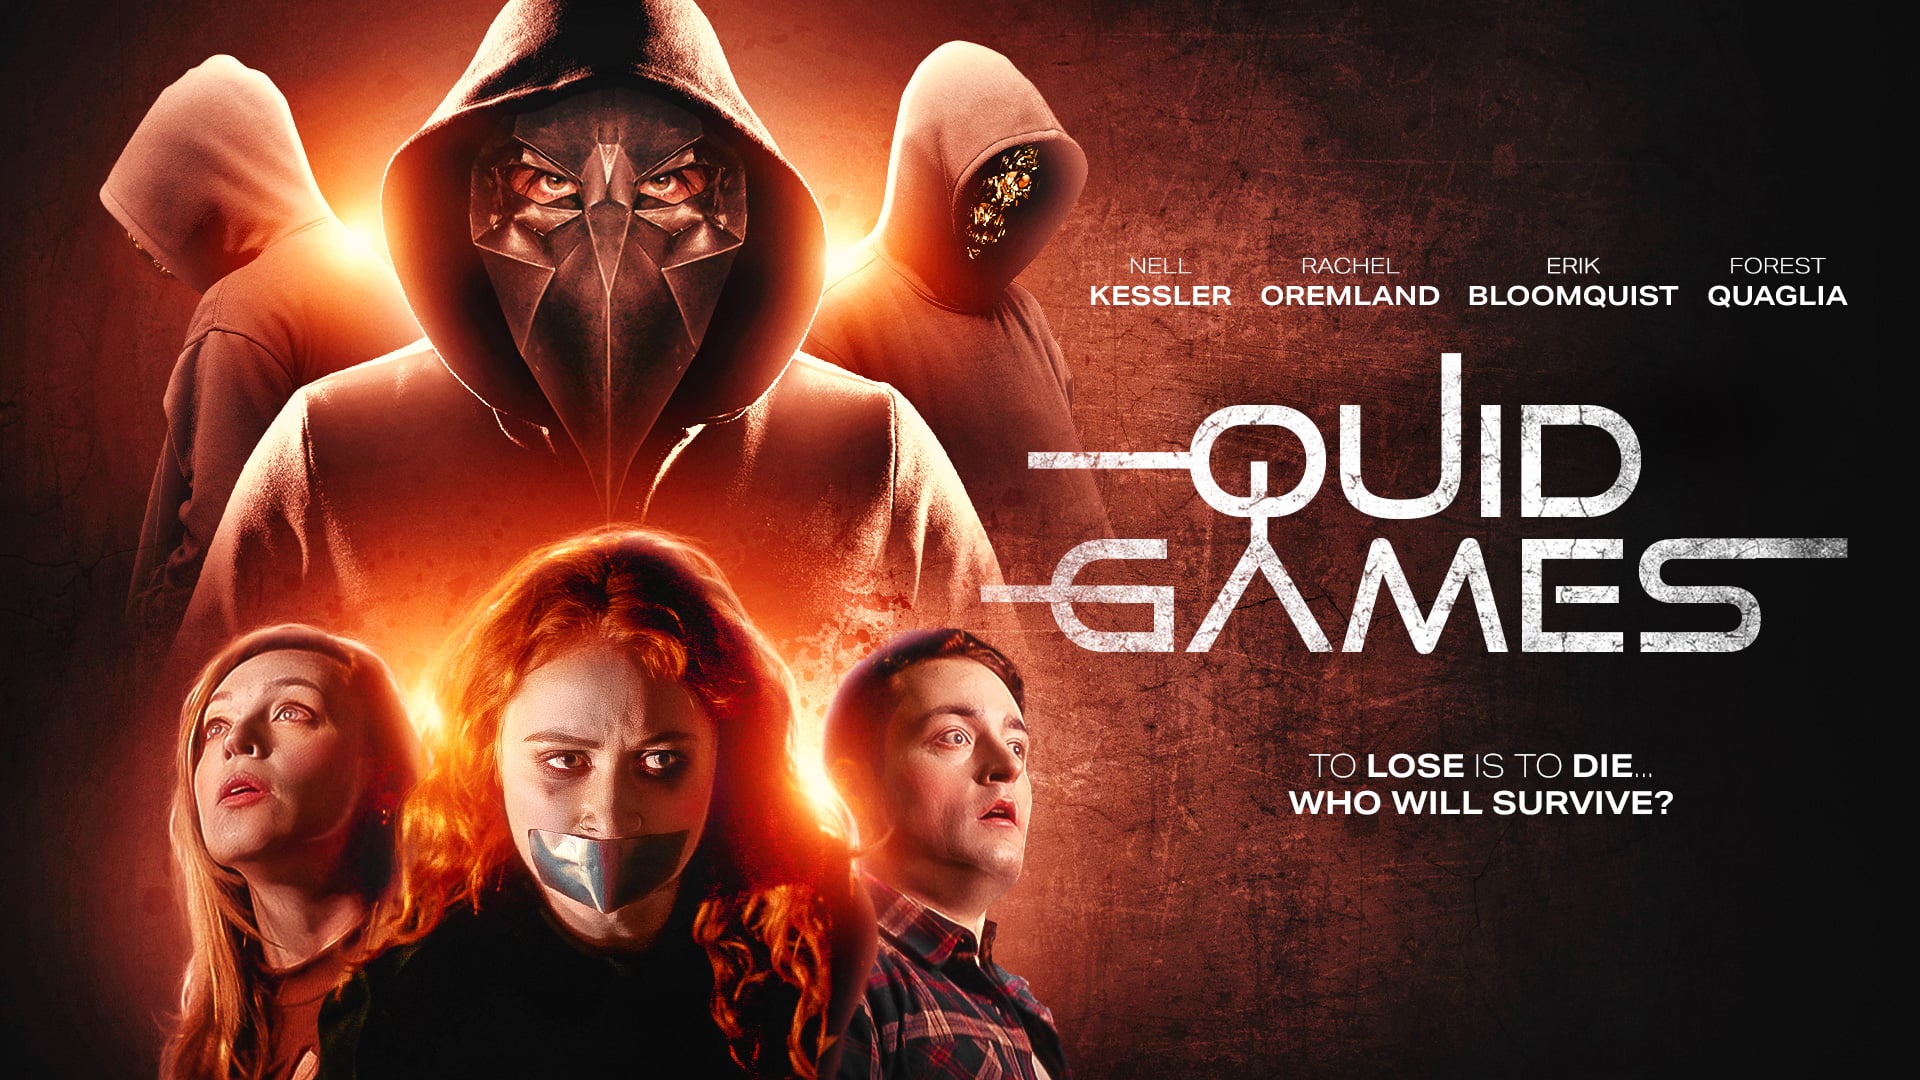 Quid Games (Official Trailer) on Vimeo